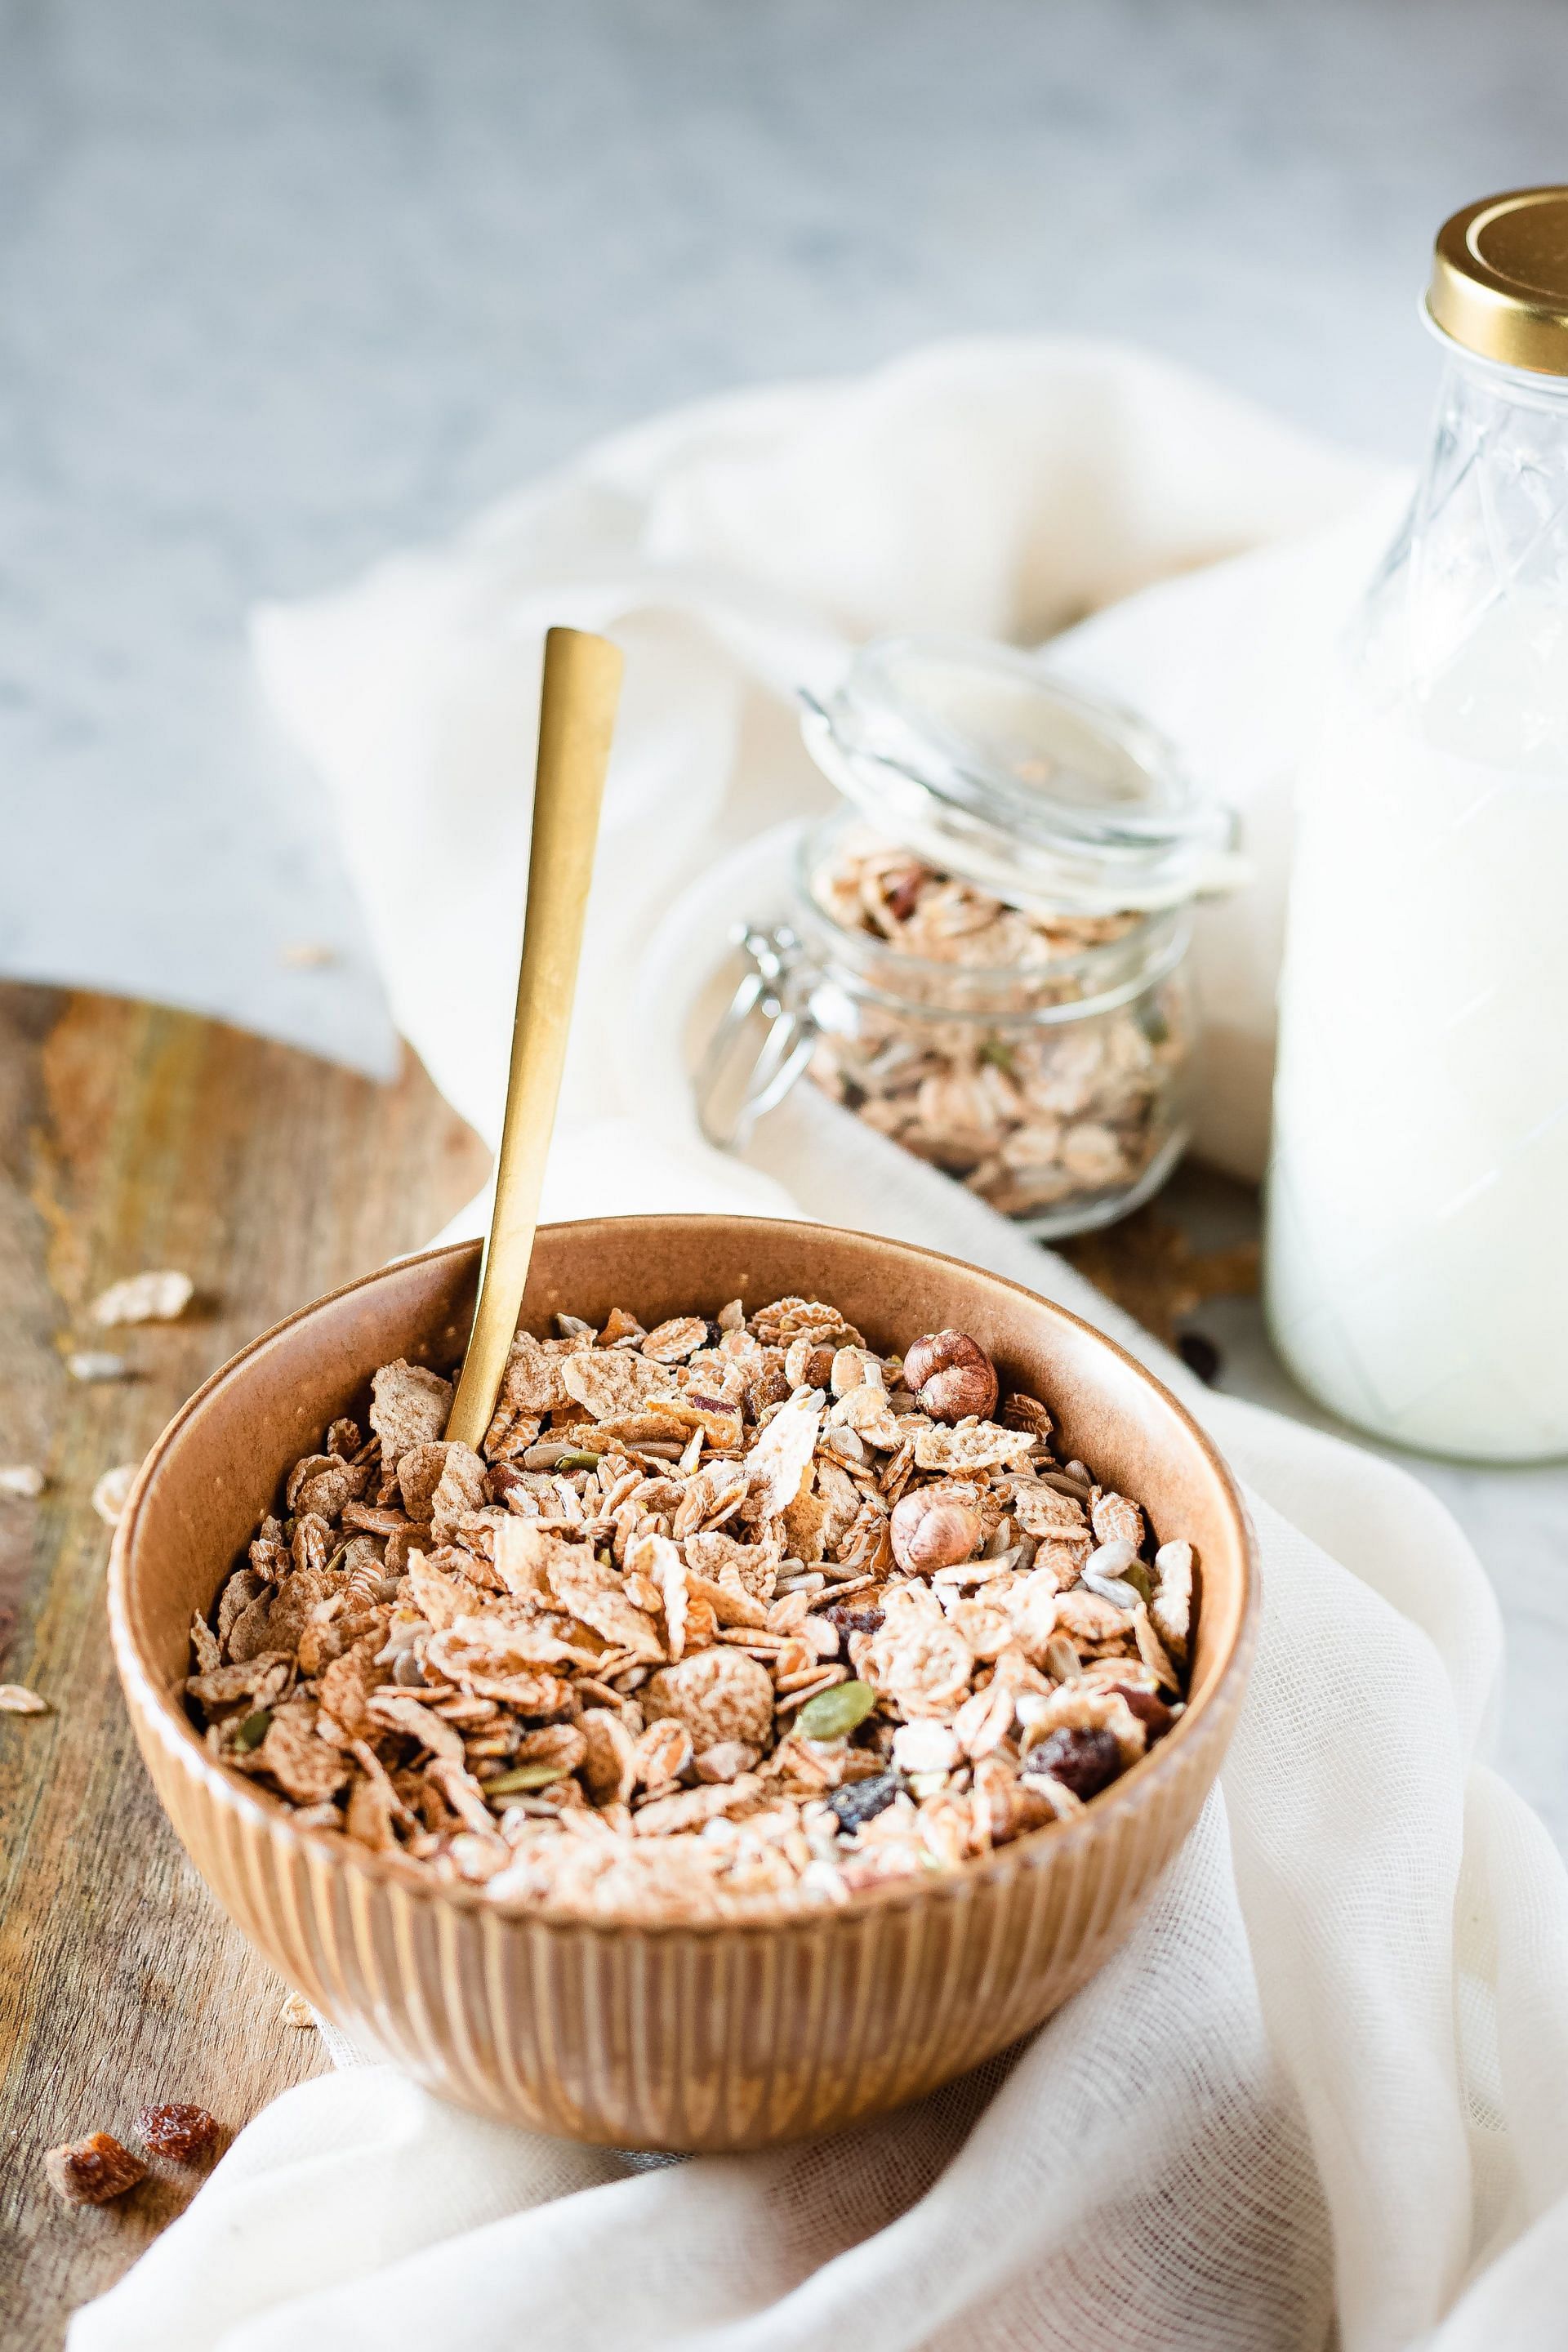 Oats are a versatile, high-carb breakfast option.